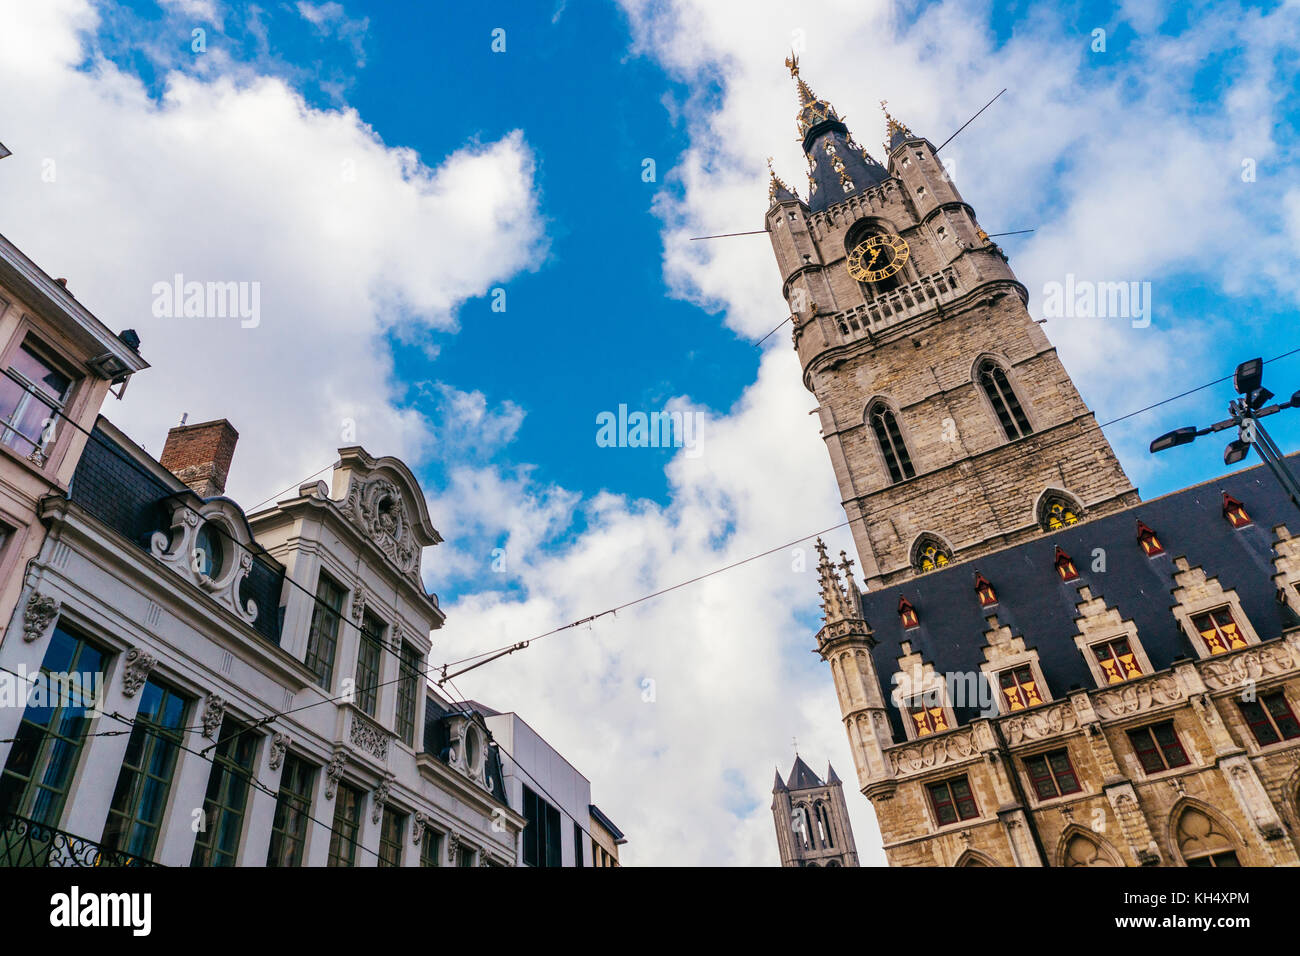 GHENT, BELGIUM - November, 2017: Architecture of Ghent city center. Ghent is medieval city and point of tourist destination in Belgium. Stock Photo